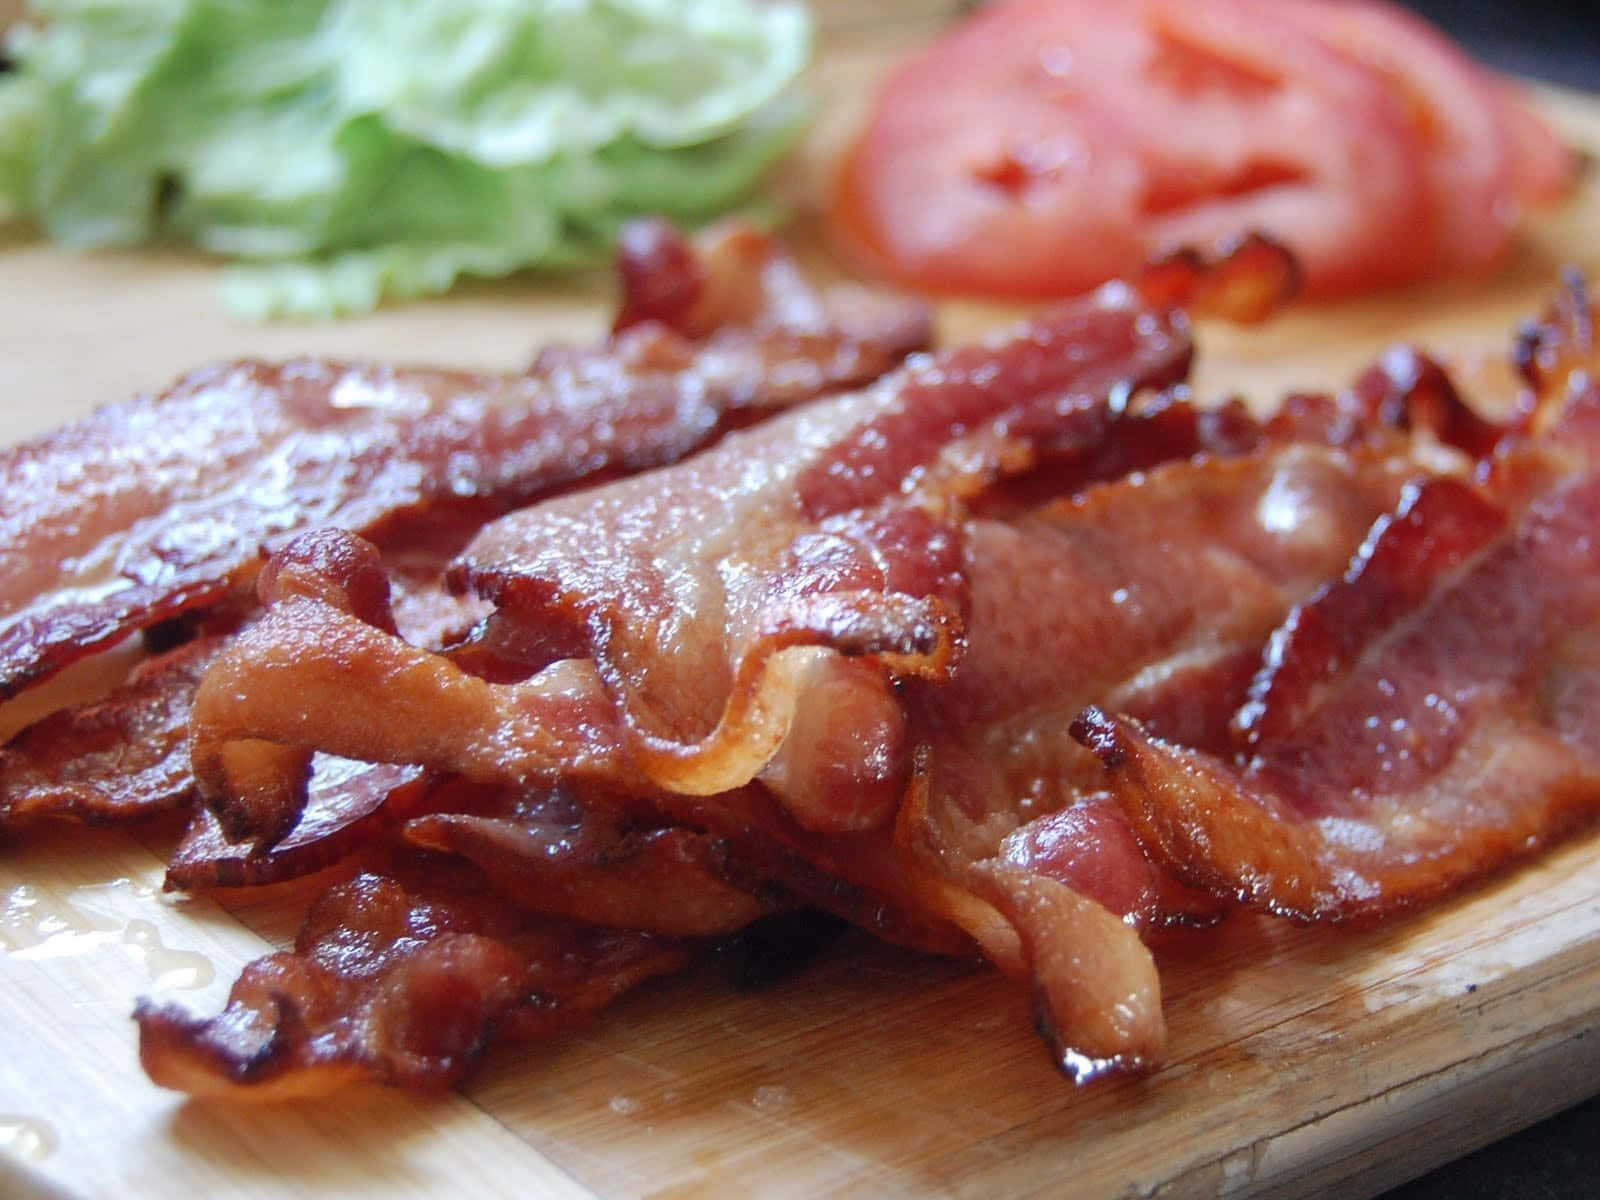 The perfect treat for any bacon-lover!